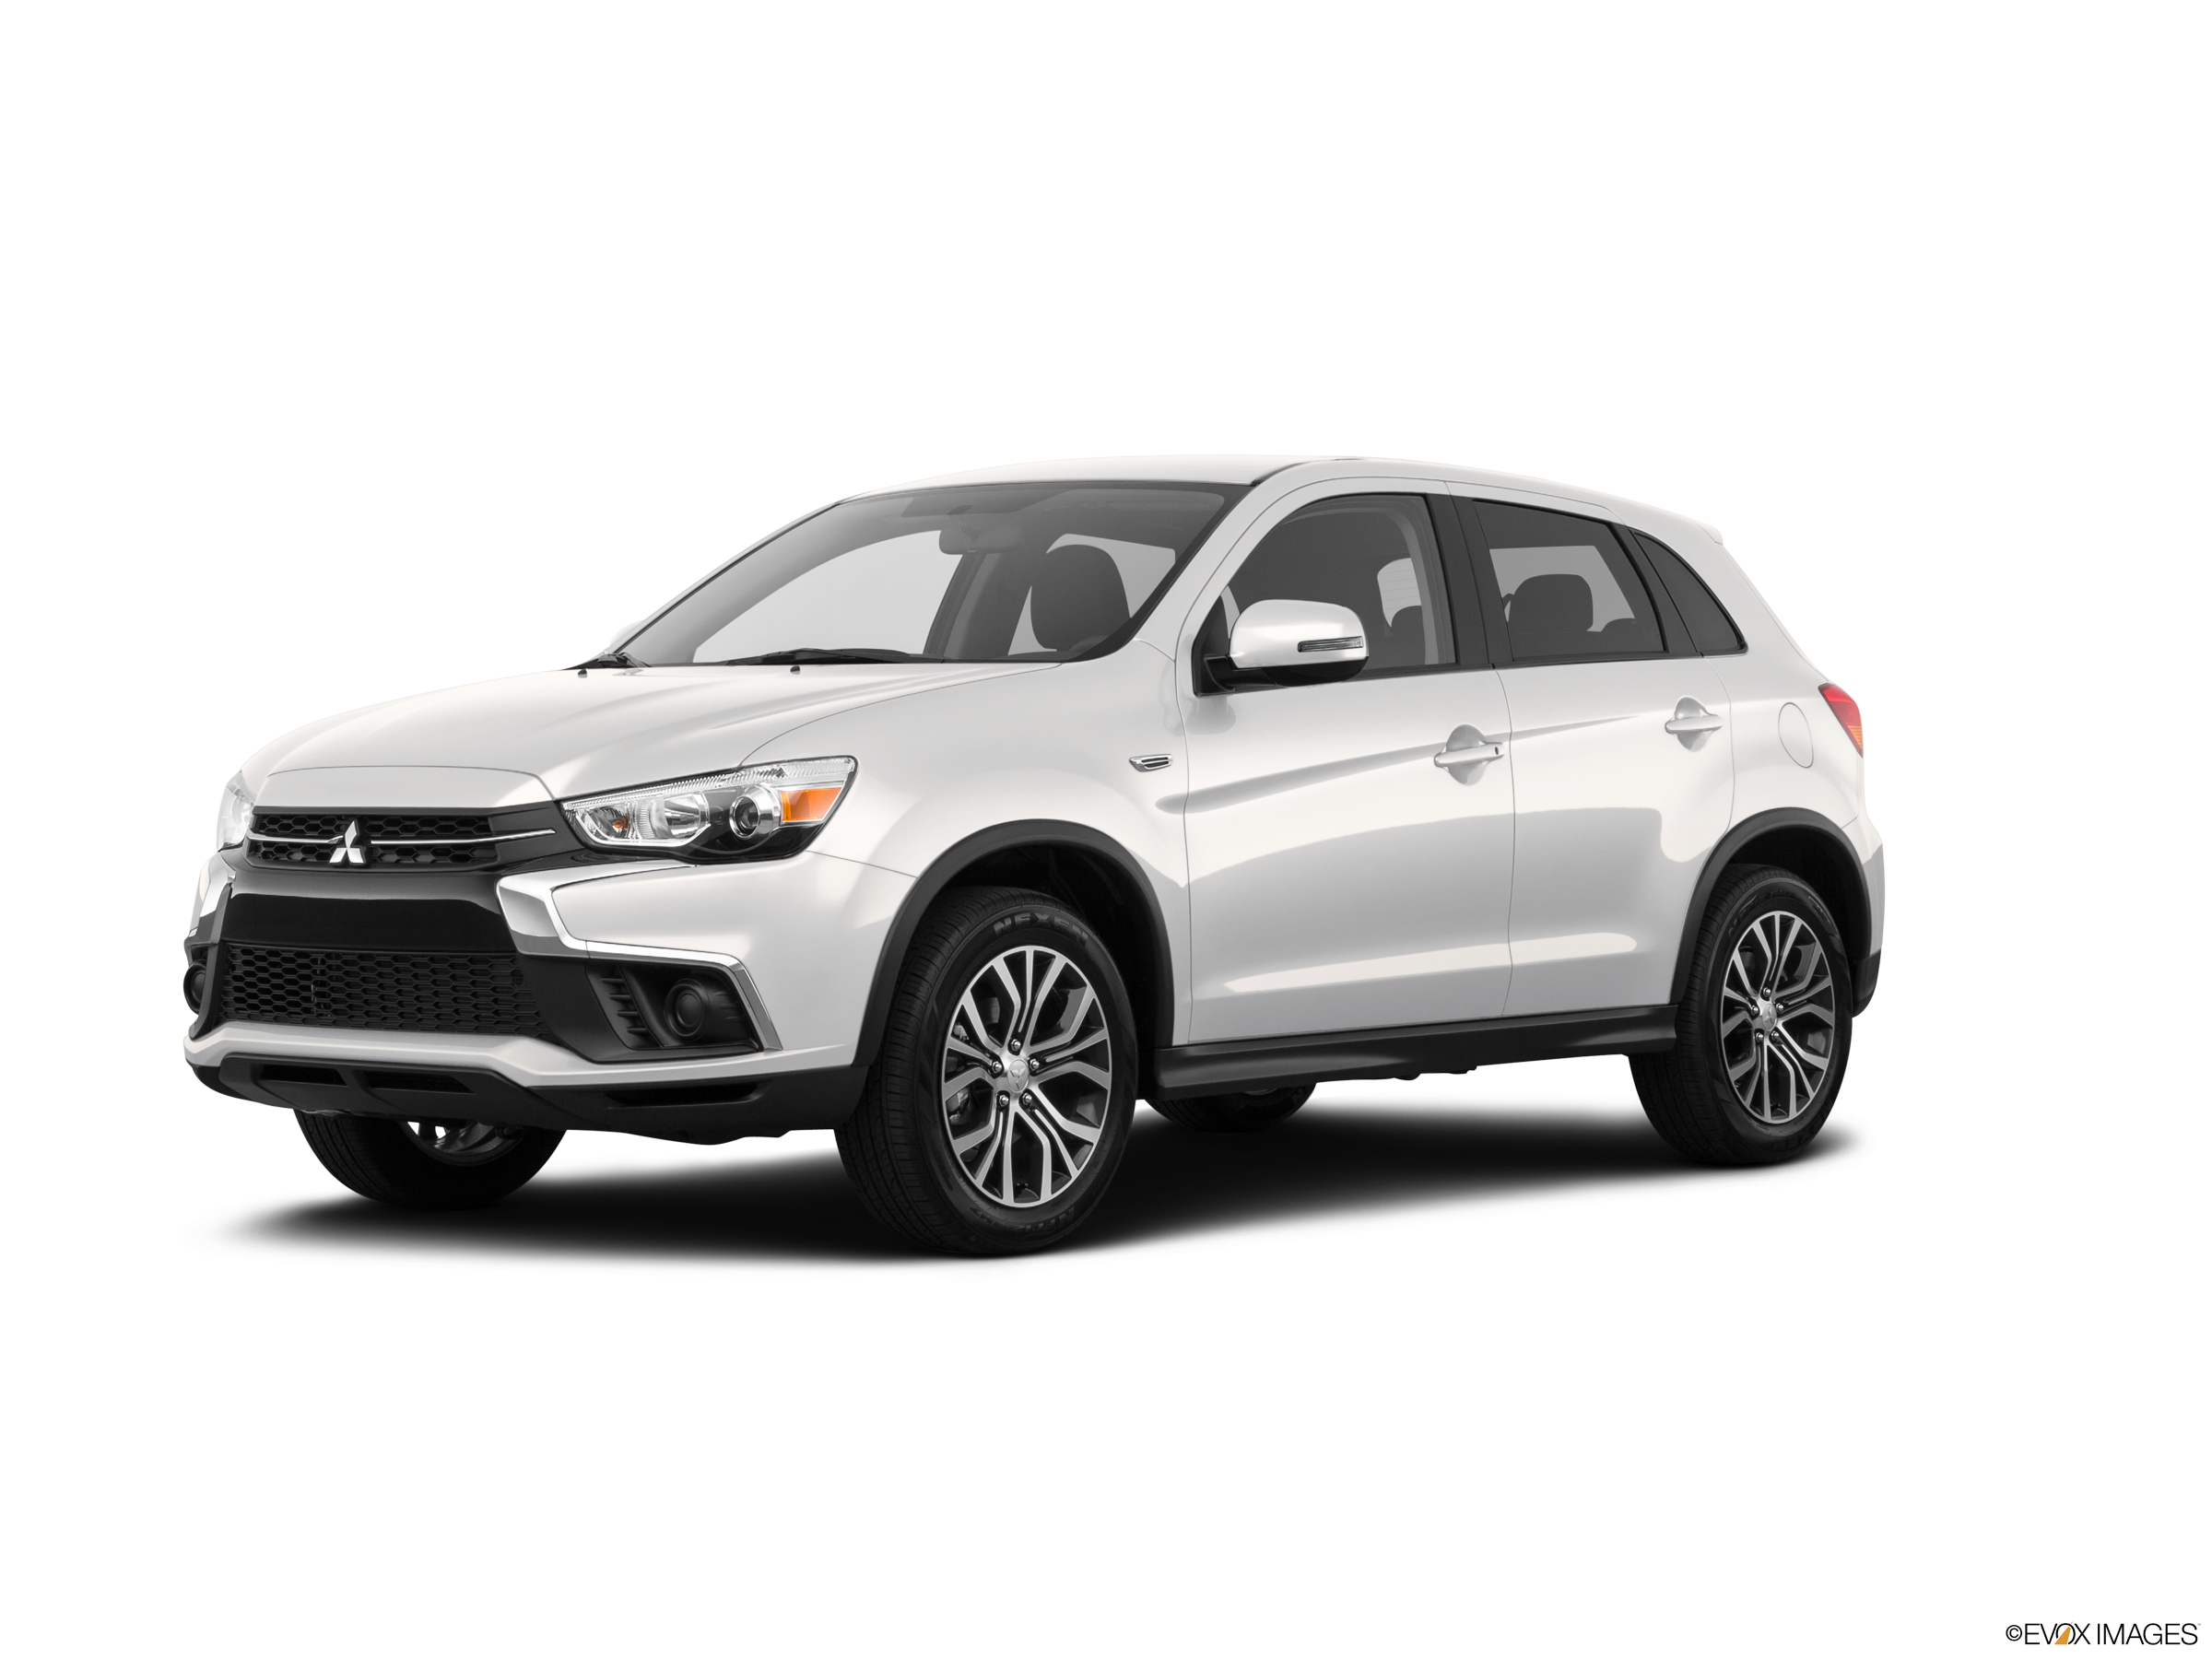 2018 Mitsubishi Outlander Sport Prices, Reviews, and Photos